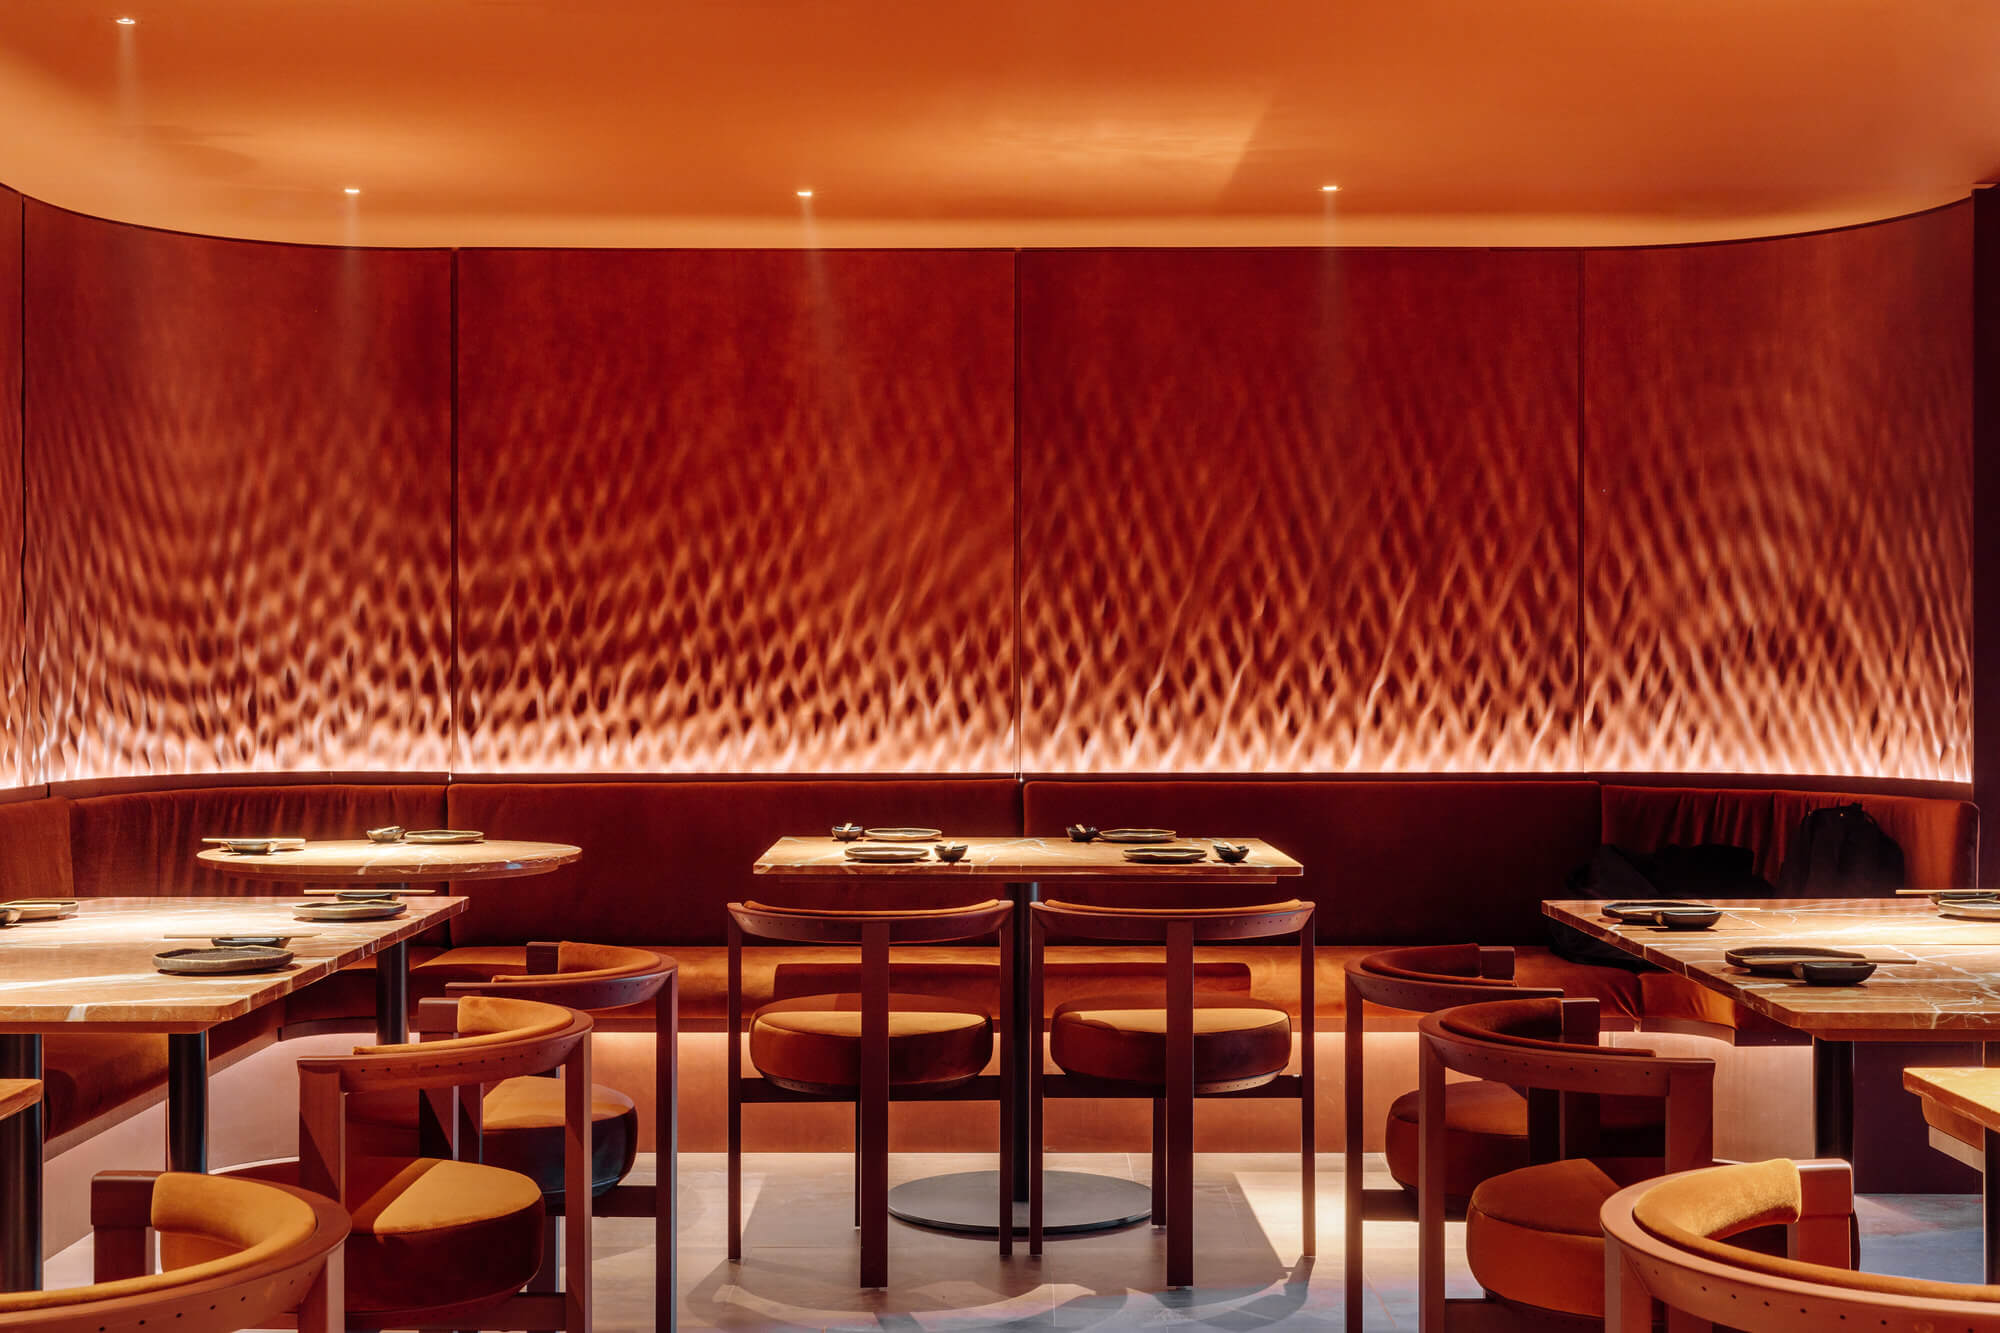 Dramatic Dining Room in Earthy Hues at Restaurant in Lisbon